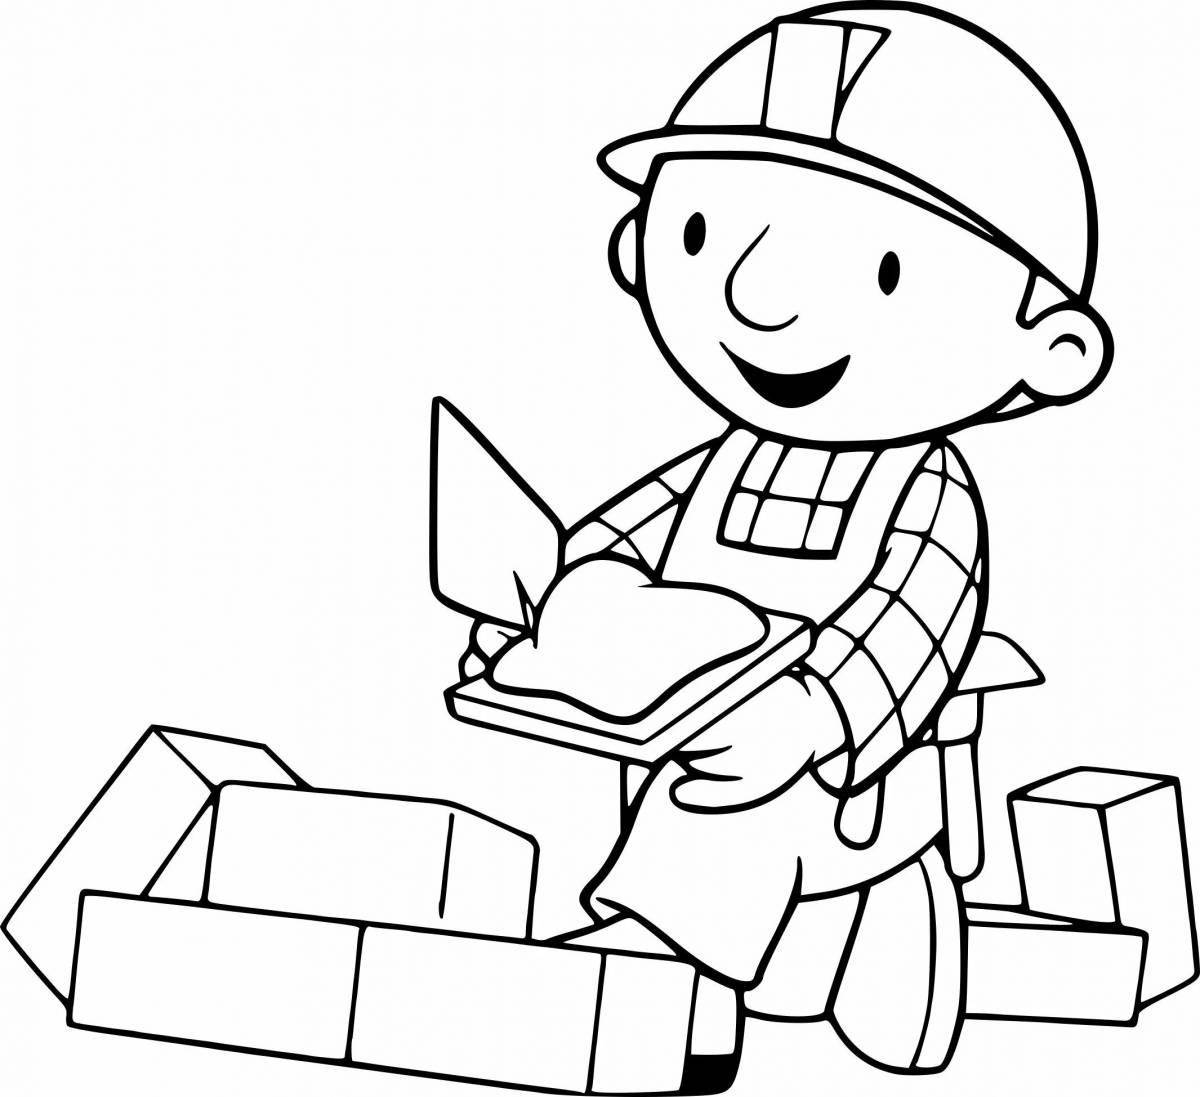 Bright bricklayer coloring book for kids